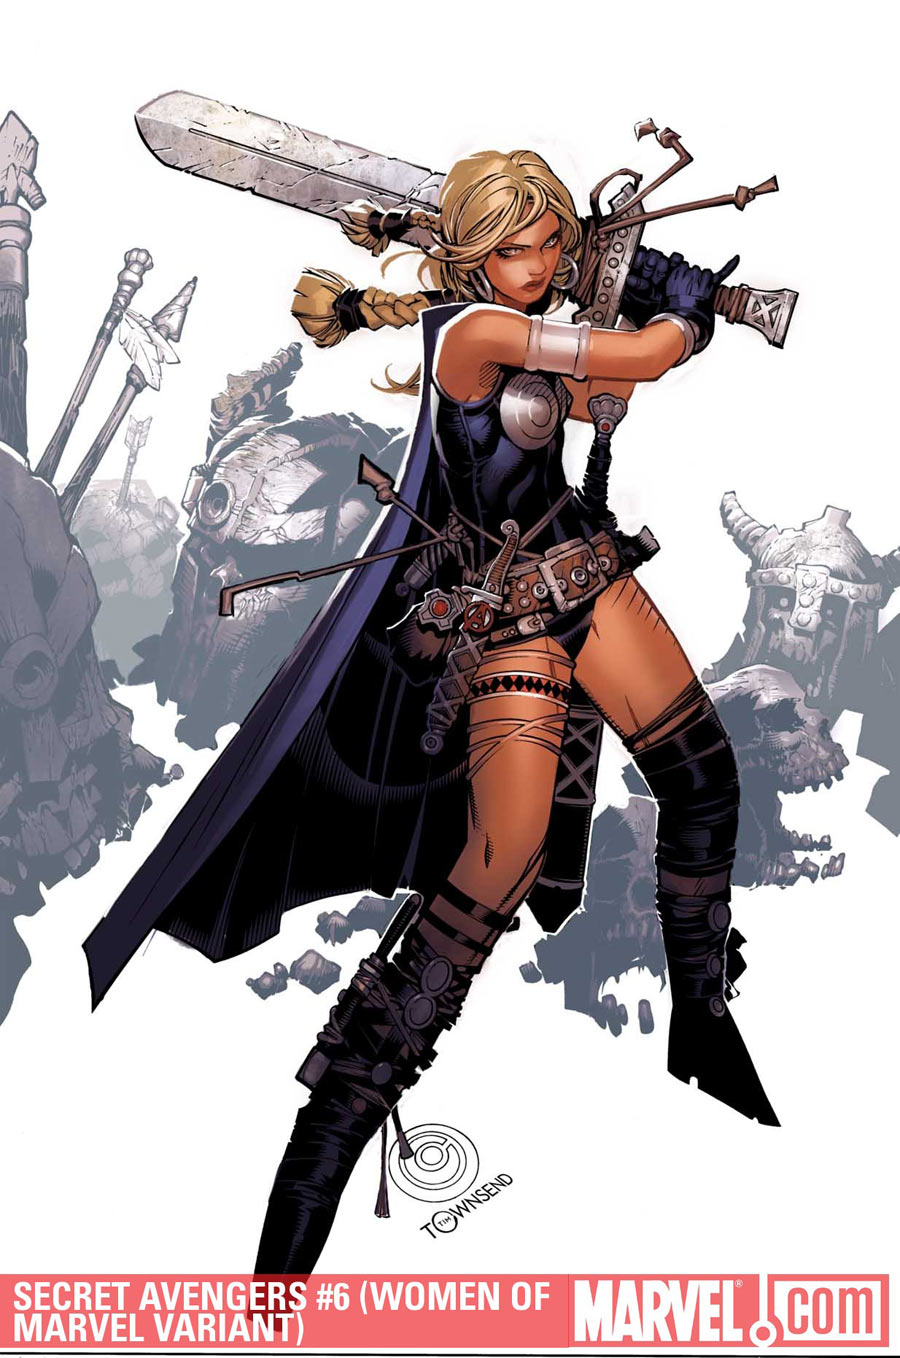 Chris Bachalo draws a Valkyrie with a big chuffing sword.